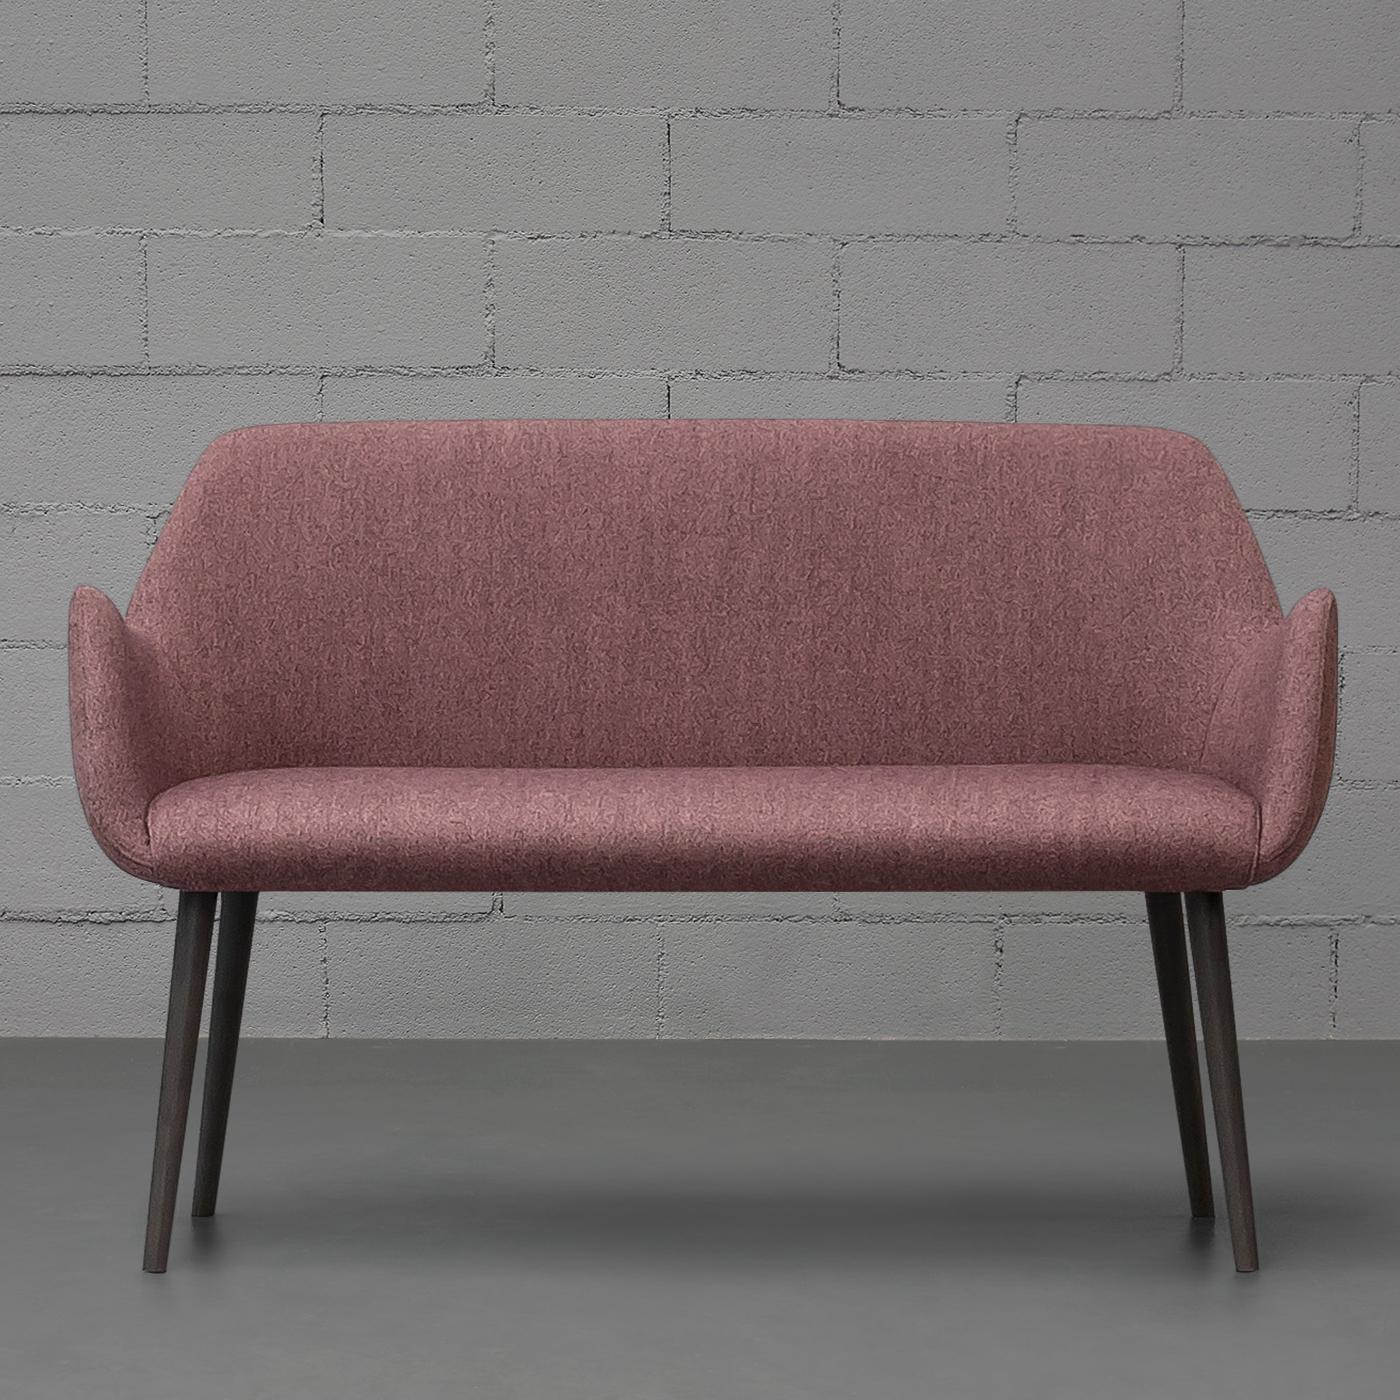 Part of the Kesy Collection, this magnificent loveseat designed by industrial designer team Carlesi & Tonelli is a superb addition to a contemporary interior decor. The elegantly outlined silhouette rests on wenge-stained ash wood legs and features